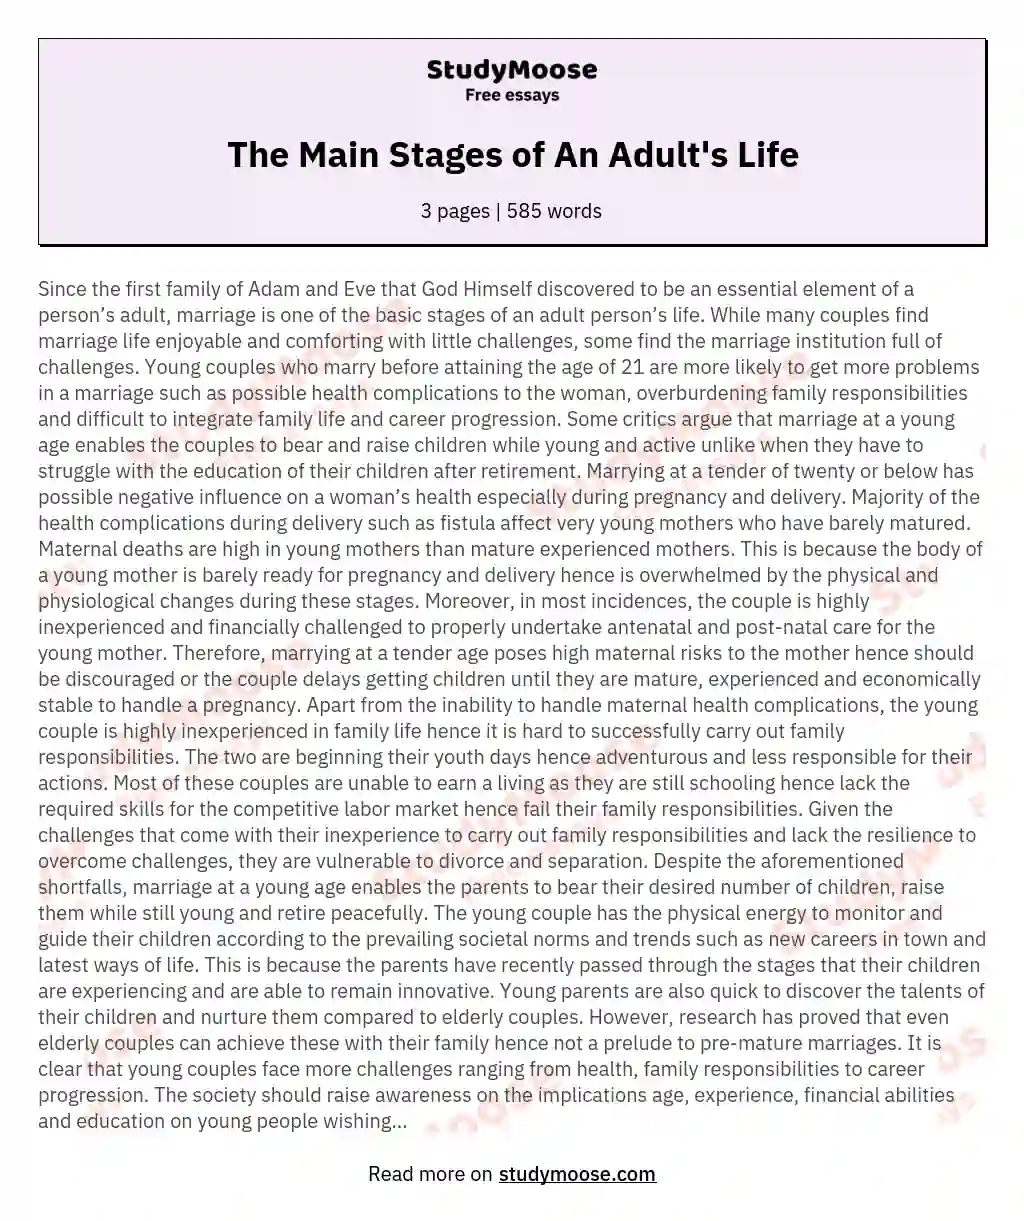 The Main Stages of An Adult's Life essay